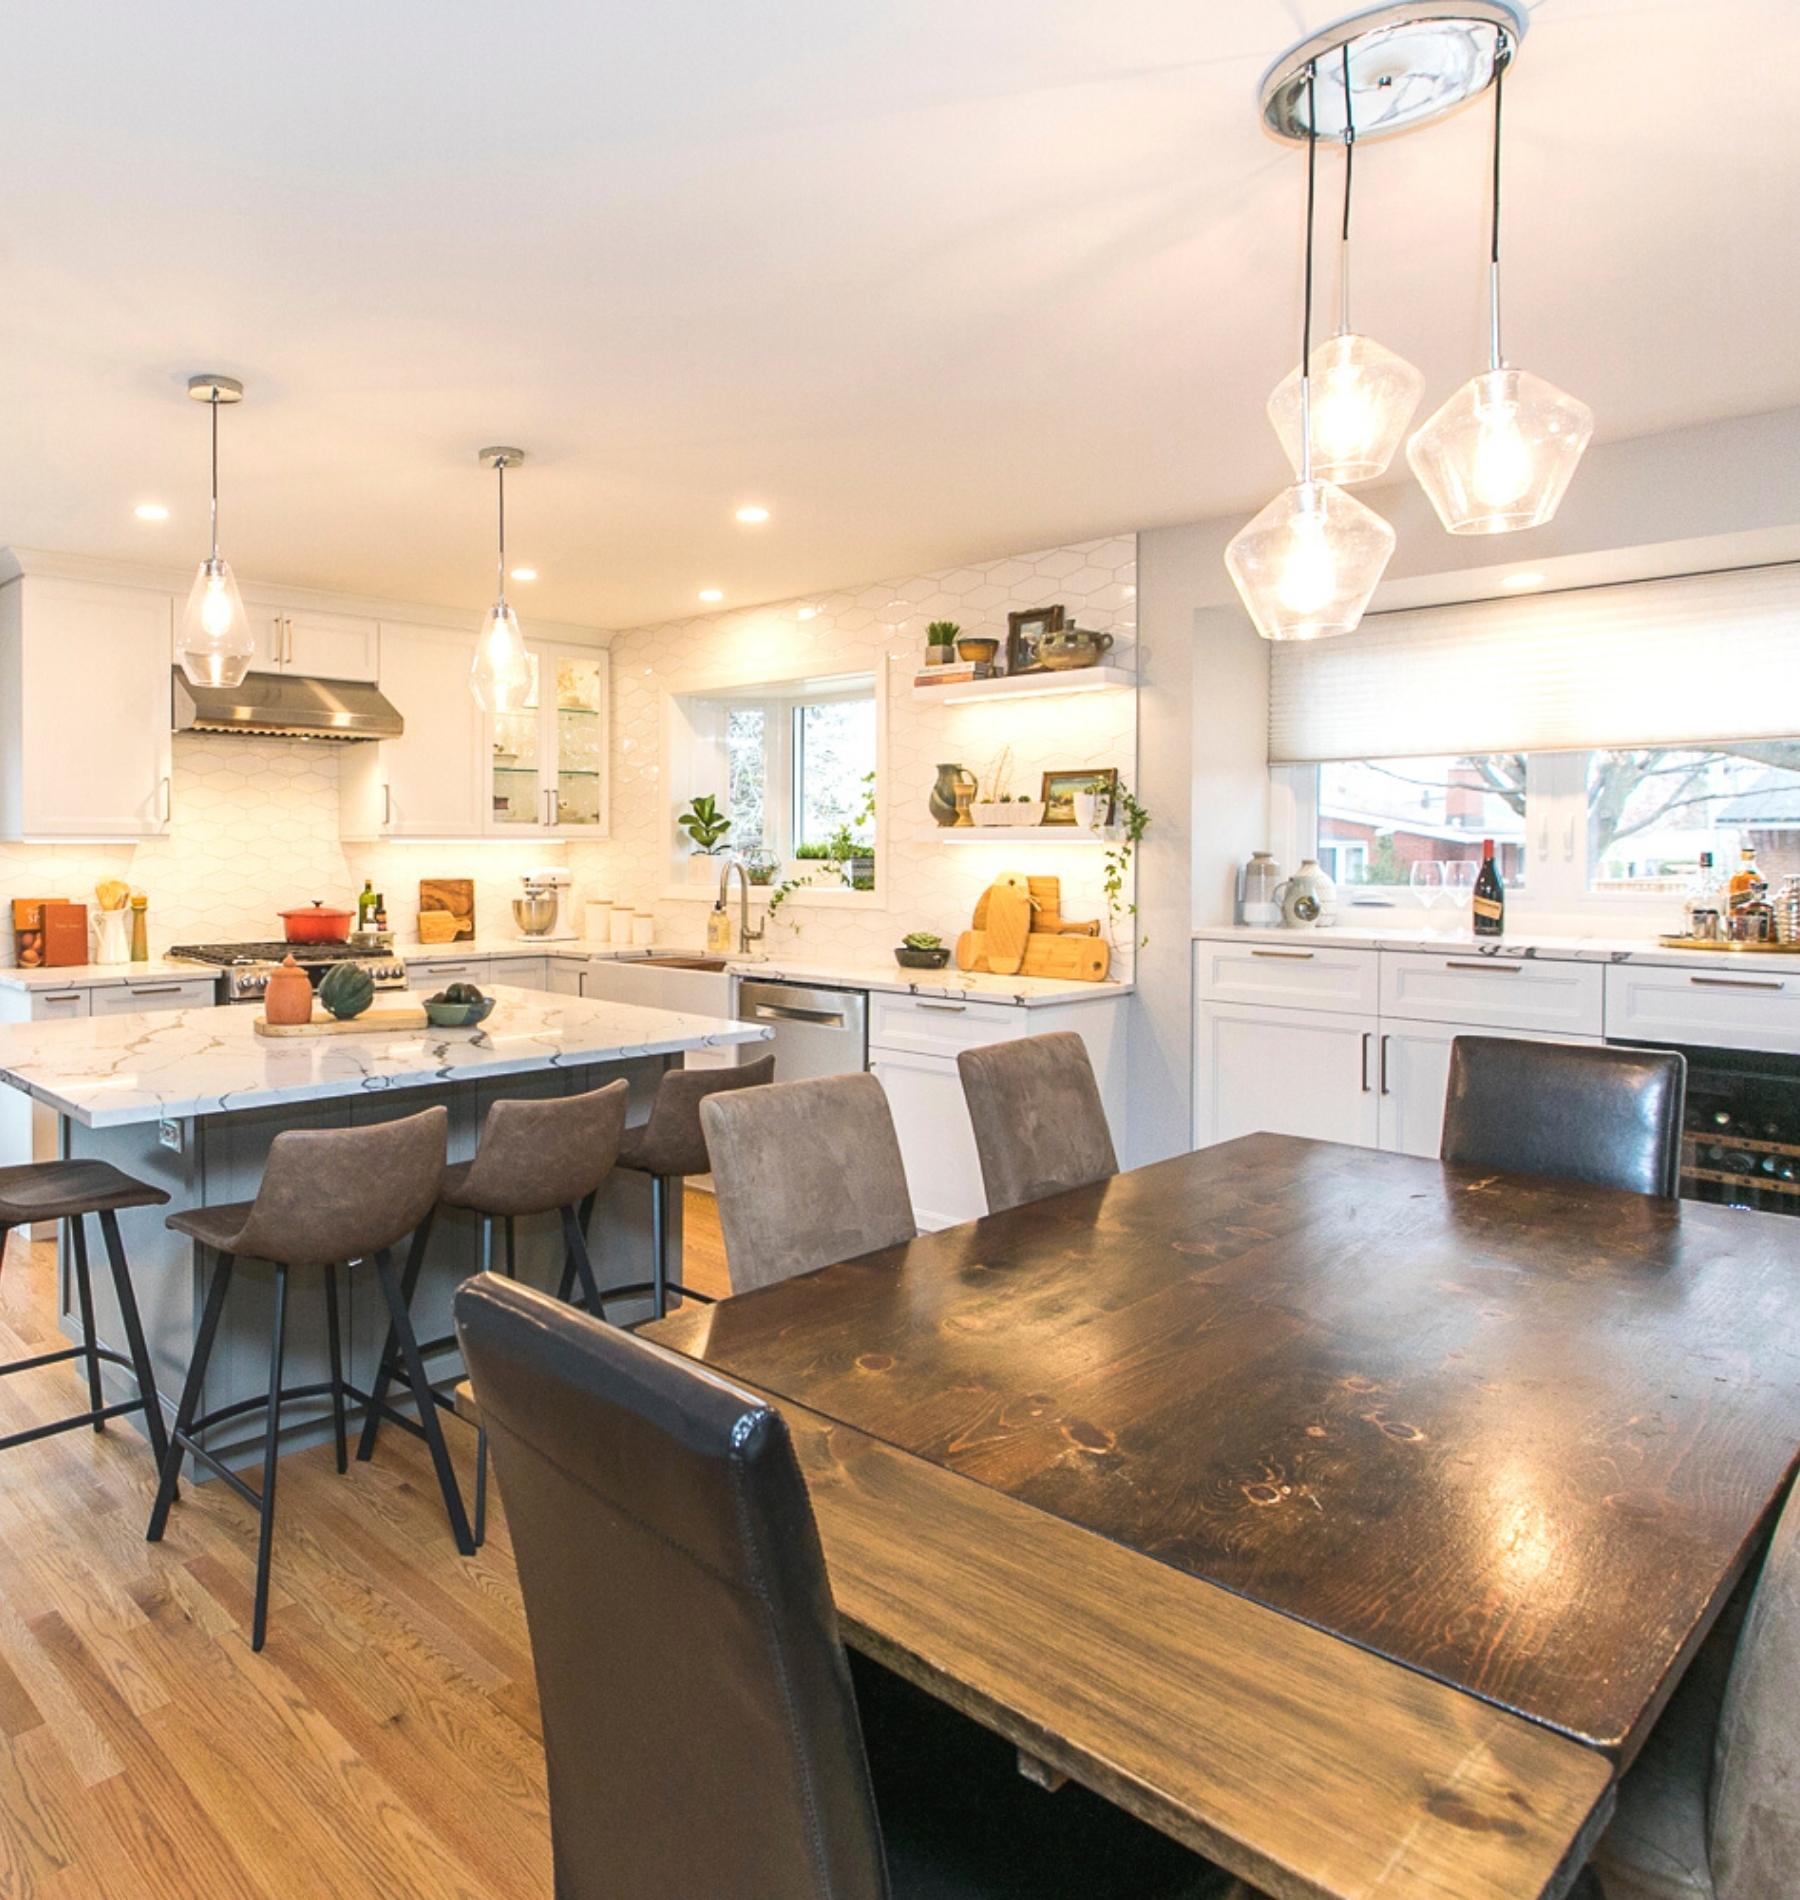 Shot of kitchen from dining area overlooking solid wood table, leather chairs and a bright white newly-renovated kitchen